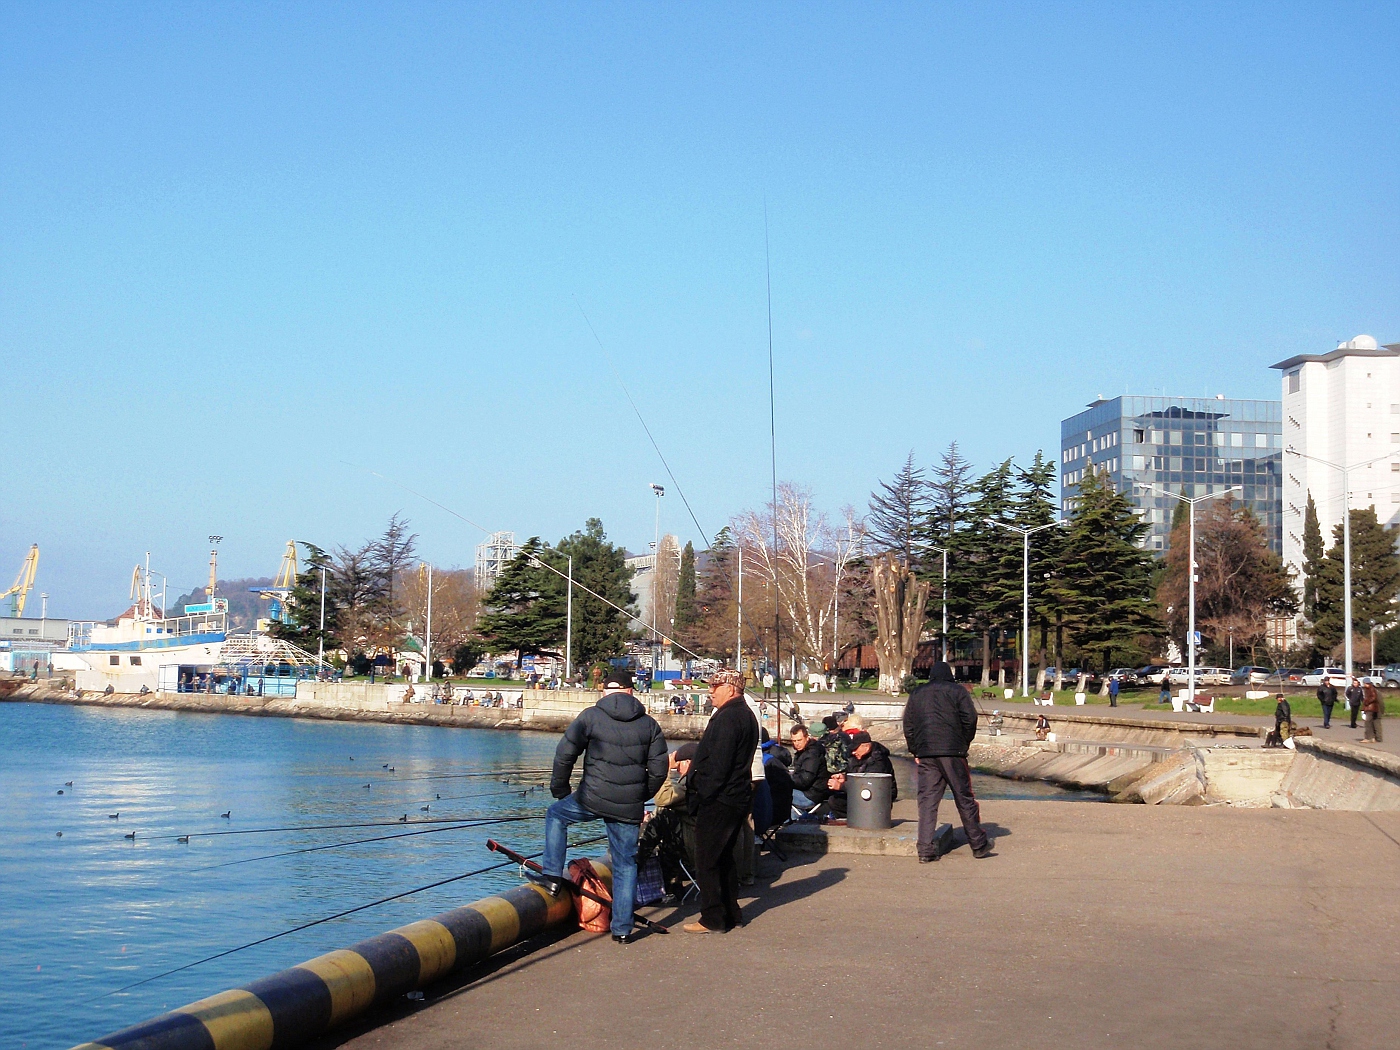 Anglers in the harbour